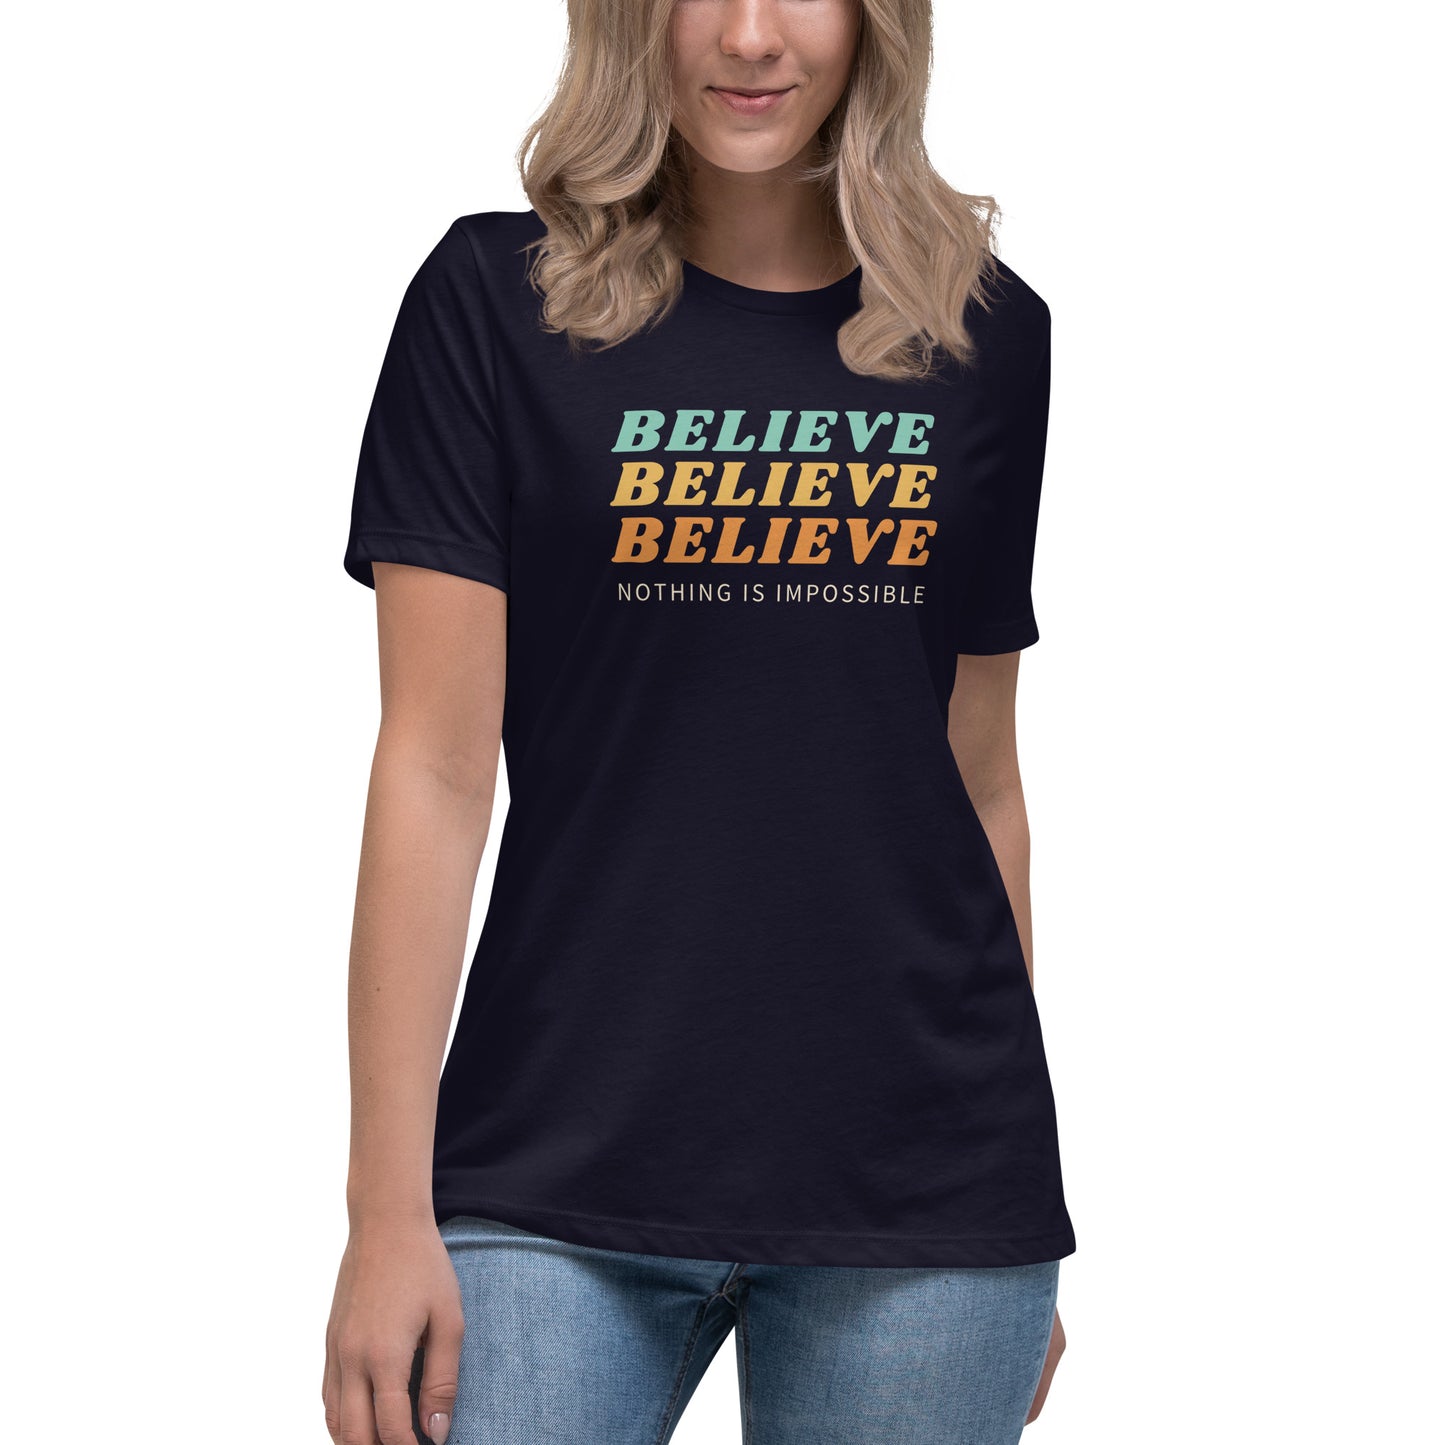 Believe Nothing Is Impossible Women's Relaxed T-Shirt